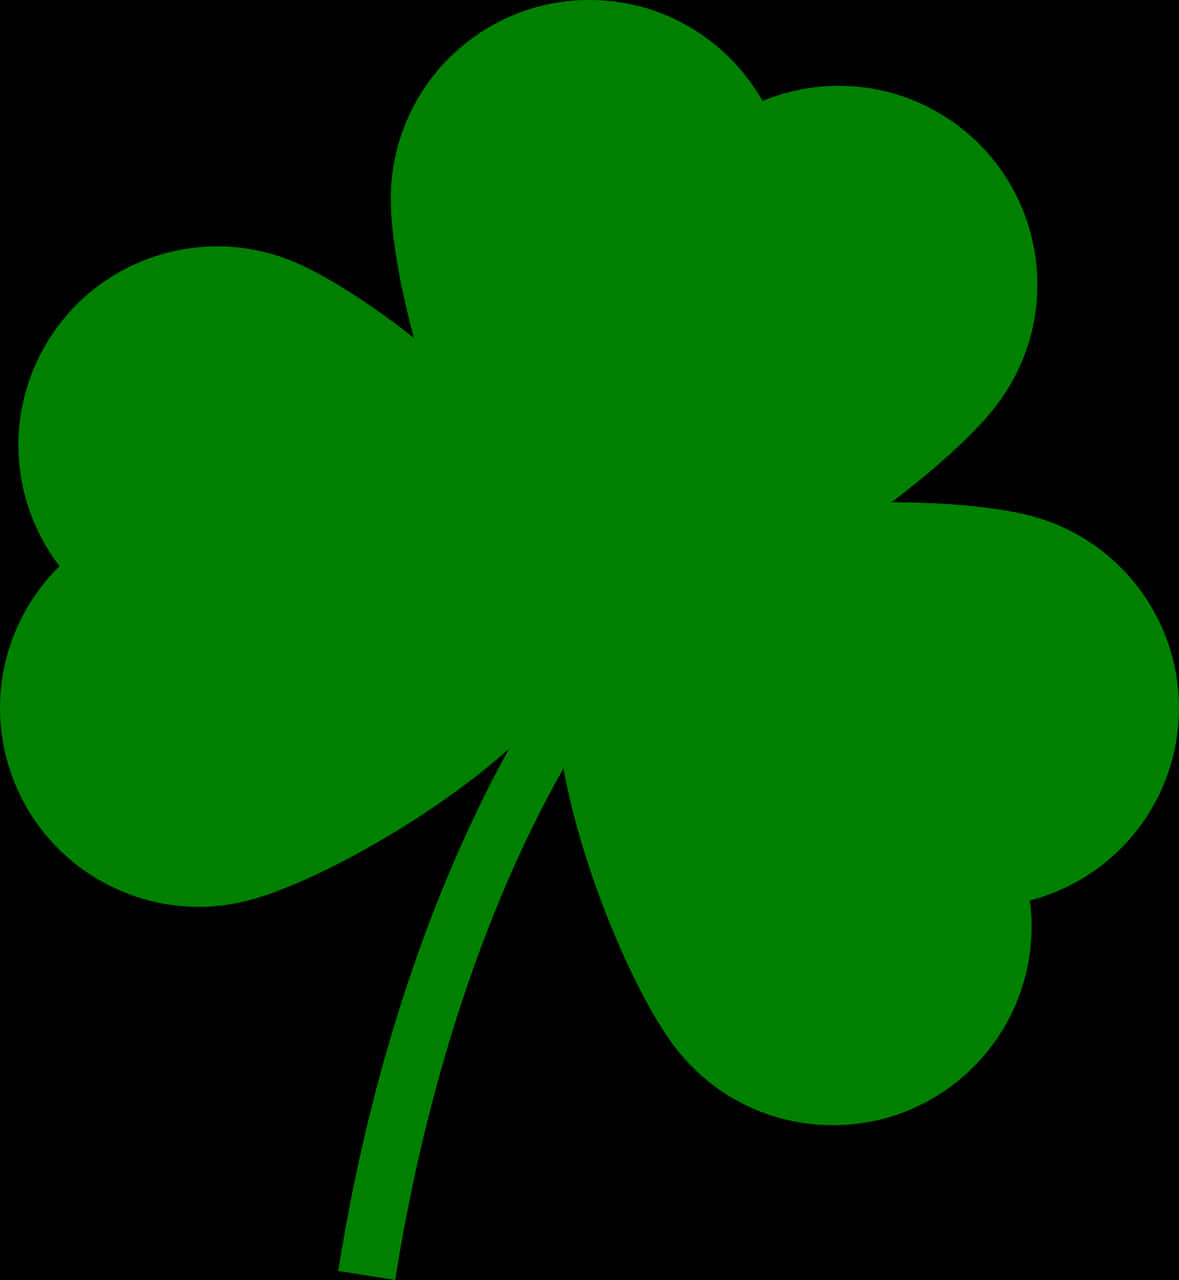 A Green Clover With A Black Background